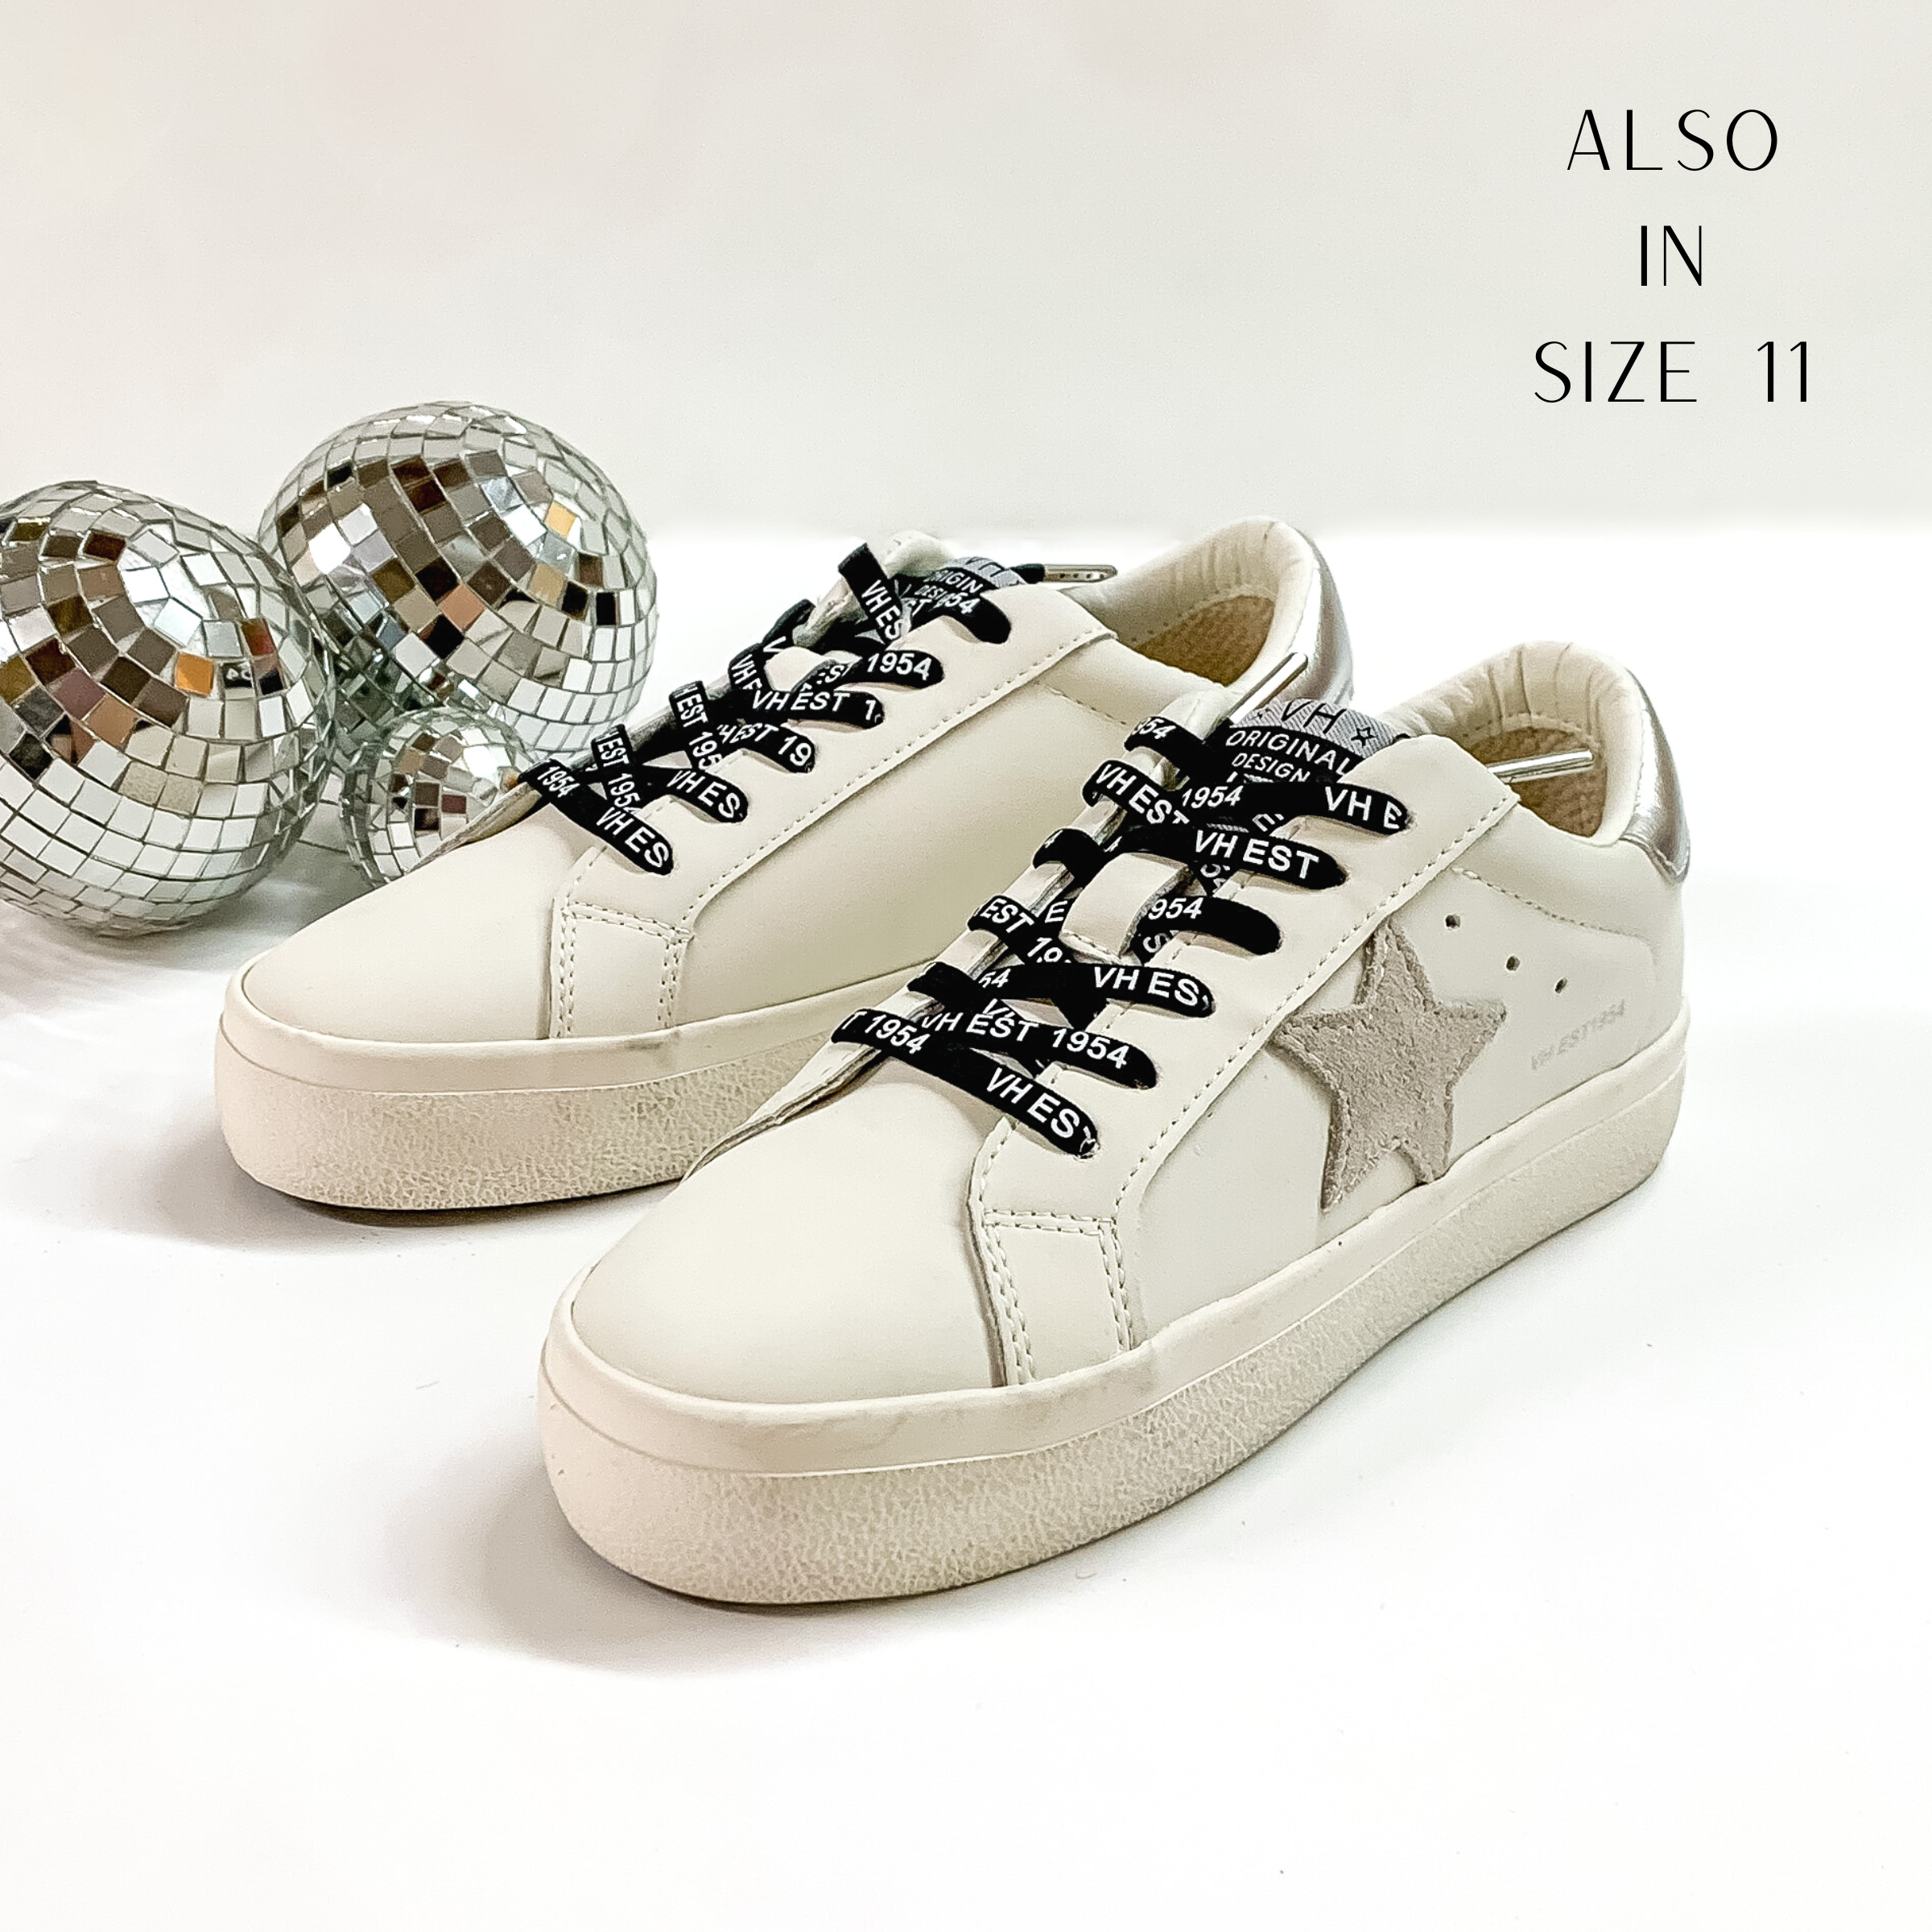 White tennis shoes and black shoelaces. The tennis shoes also have a silver glitter star patch on the side and a silver heel patch. These shoes are pictured on a white background with disco balls behind them. 